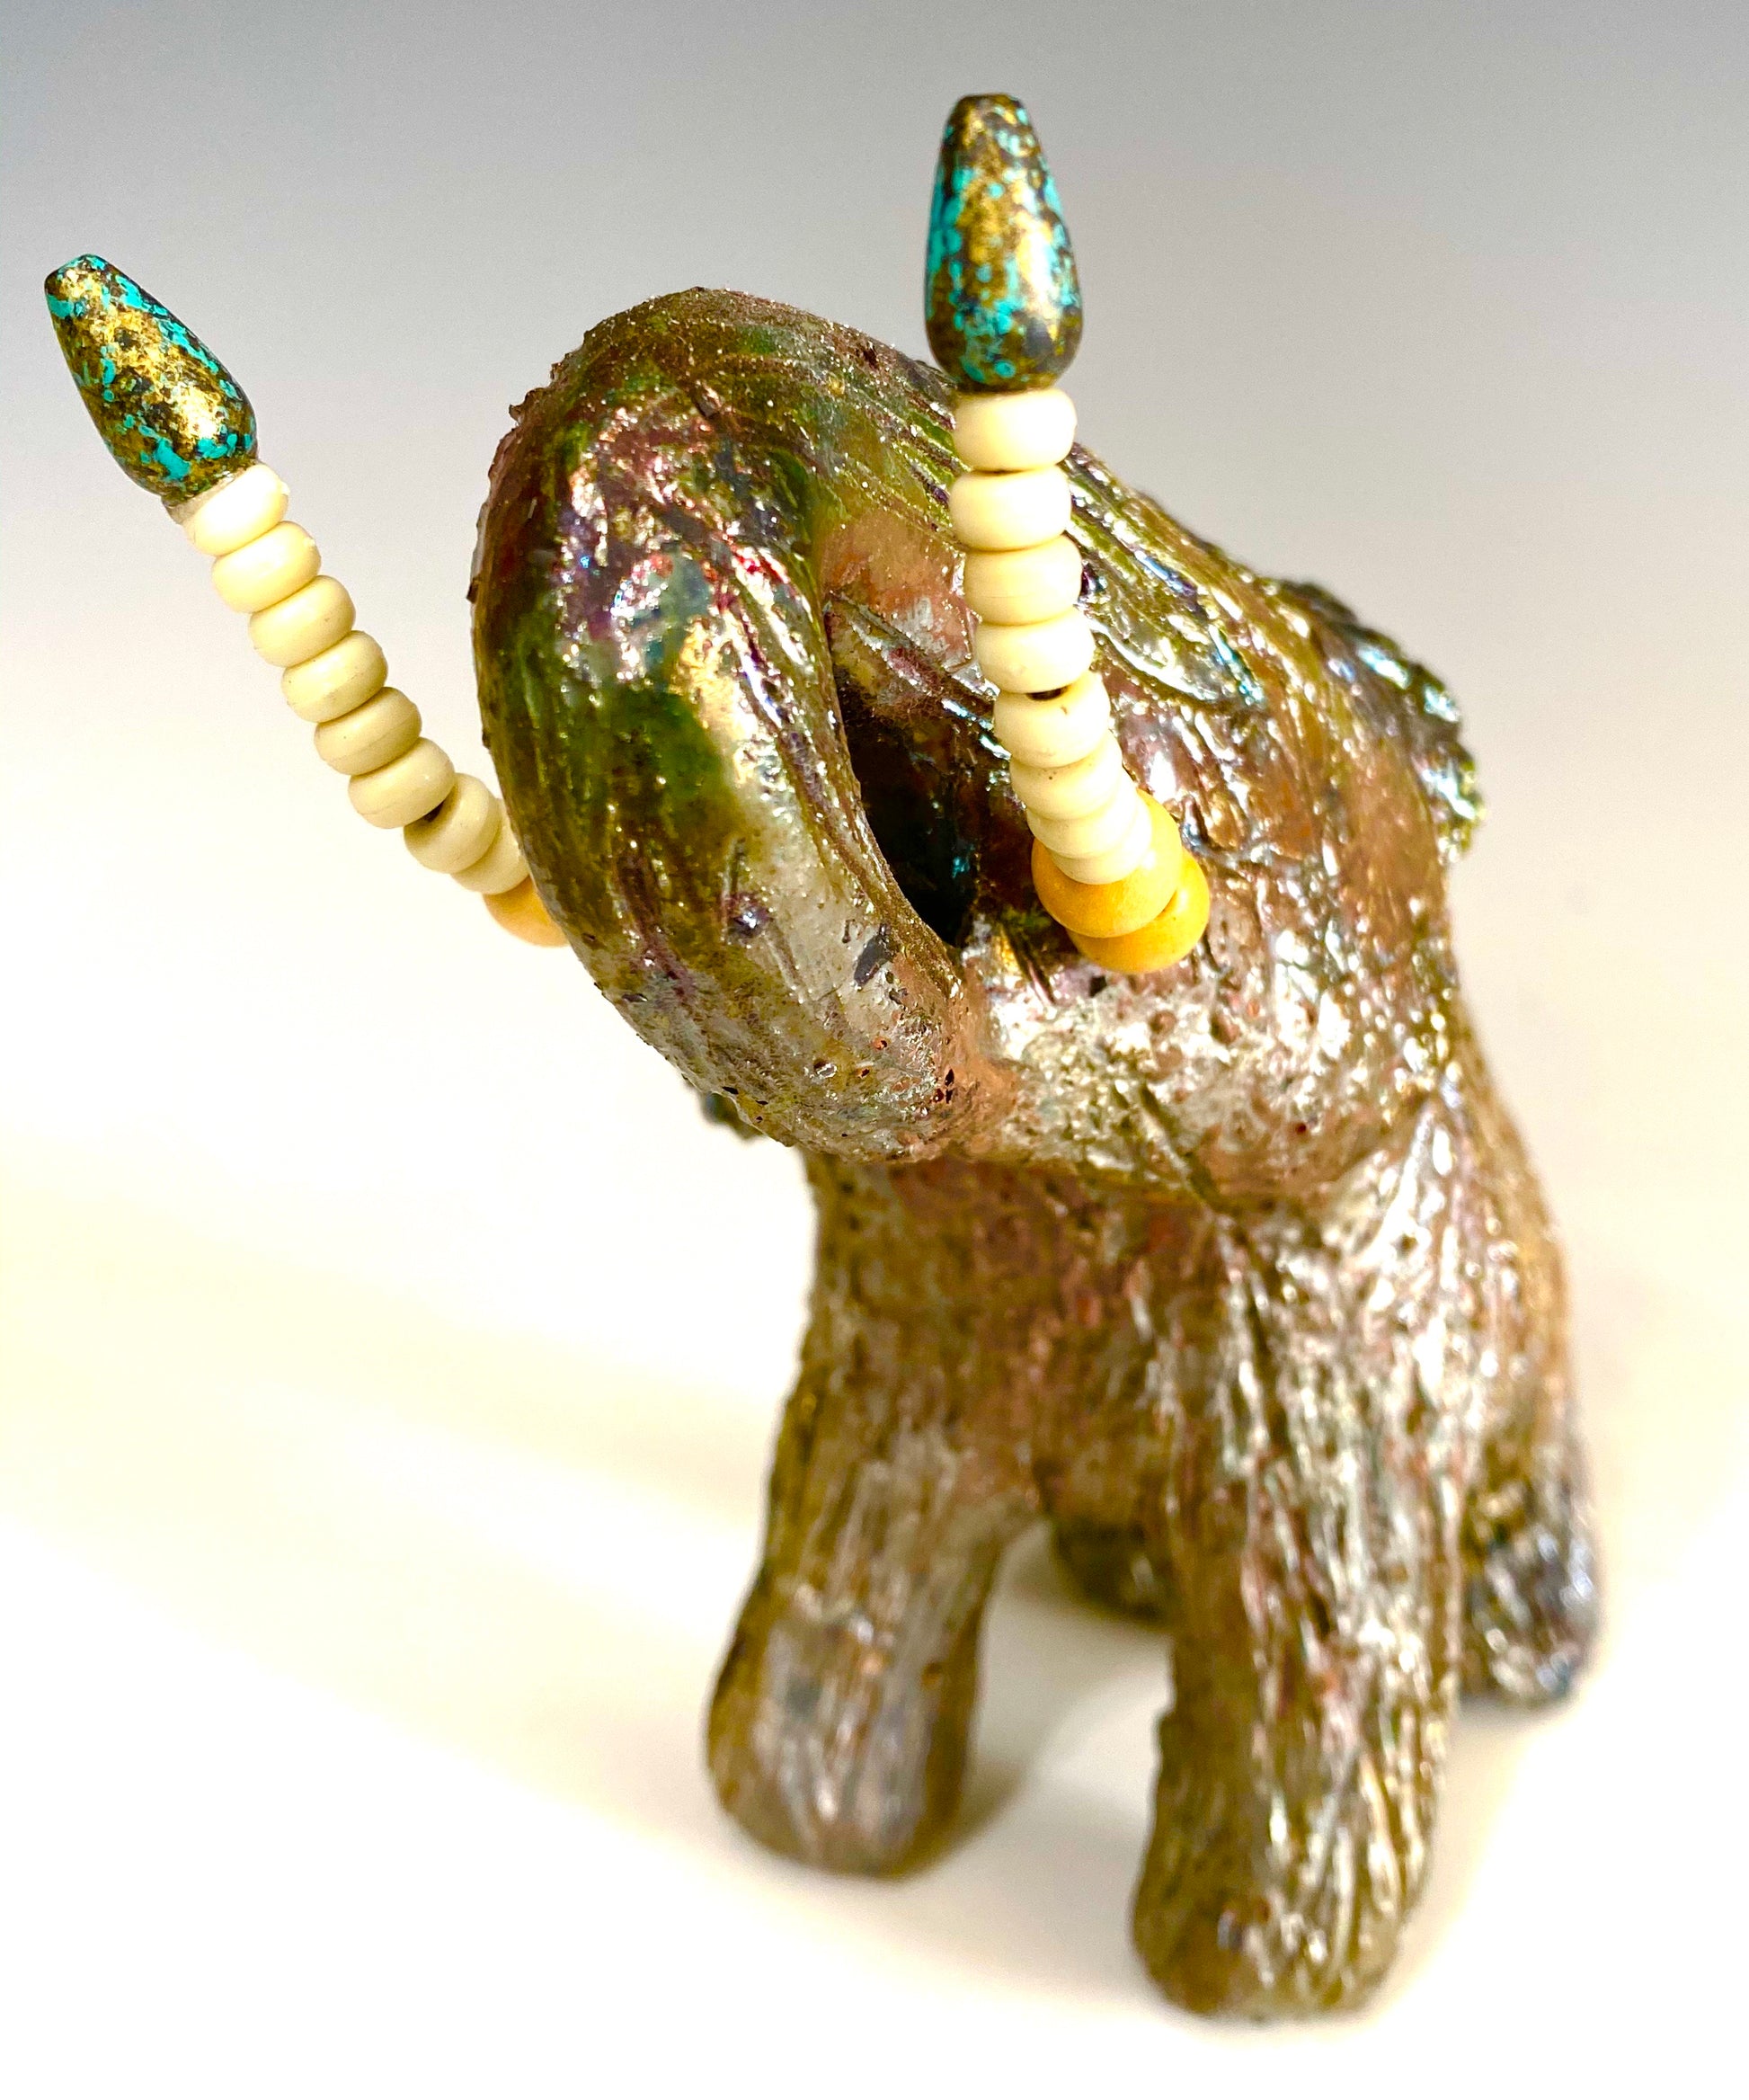 Raku Elephant Have you HERD!!!!!!  Just one of these lovely Raku Fired Elephant will make an excellent gift for your  friend, sorority or for your home’ special place centerpiece.   6" x 3" x 5" 1 lbs Beautiful metallic raku elephant For decorative purposely only